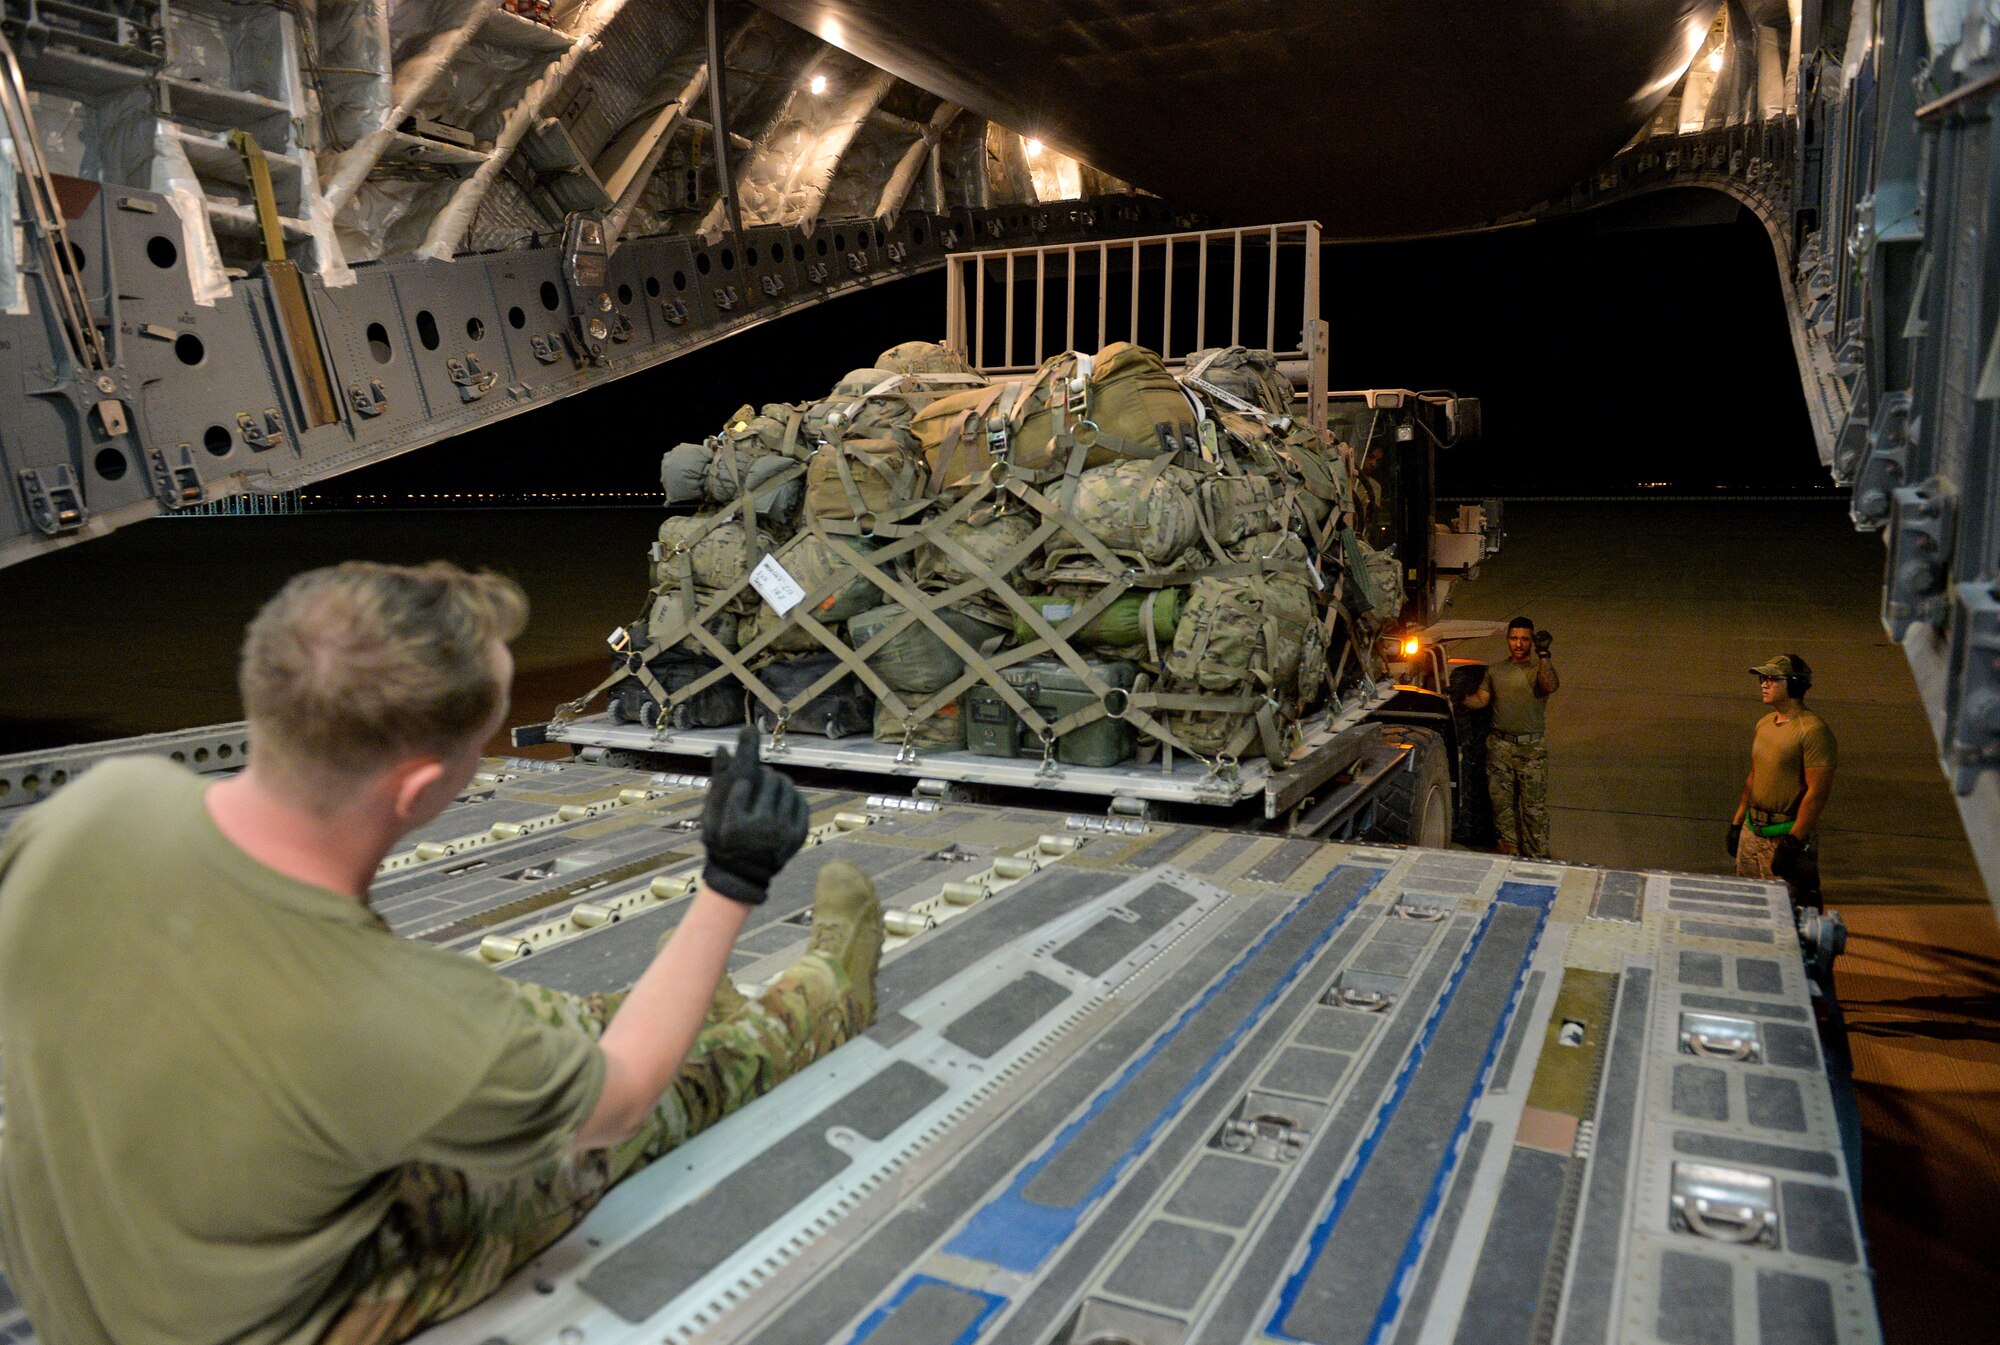 U.S. Air Force Aerial Transportation Specialists with the 378th Aerial Expeditionary Squadron, unload cargo from the back of a C-17 Globemaster III arriving at Prince Sultan Air Base (PSAB), Kingdom of Saudi Arabia (KSA), October  23, 2109.